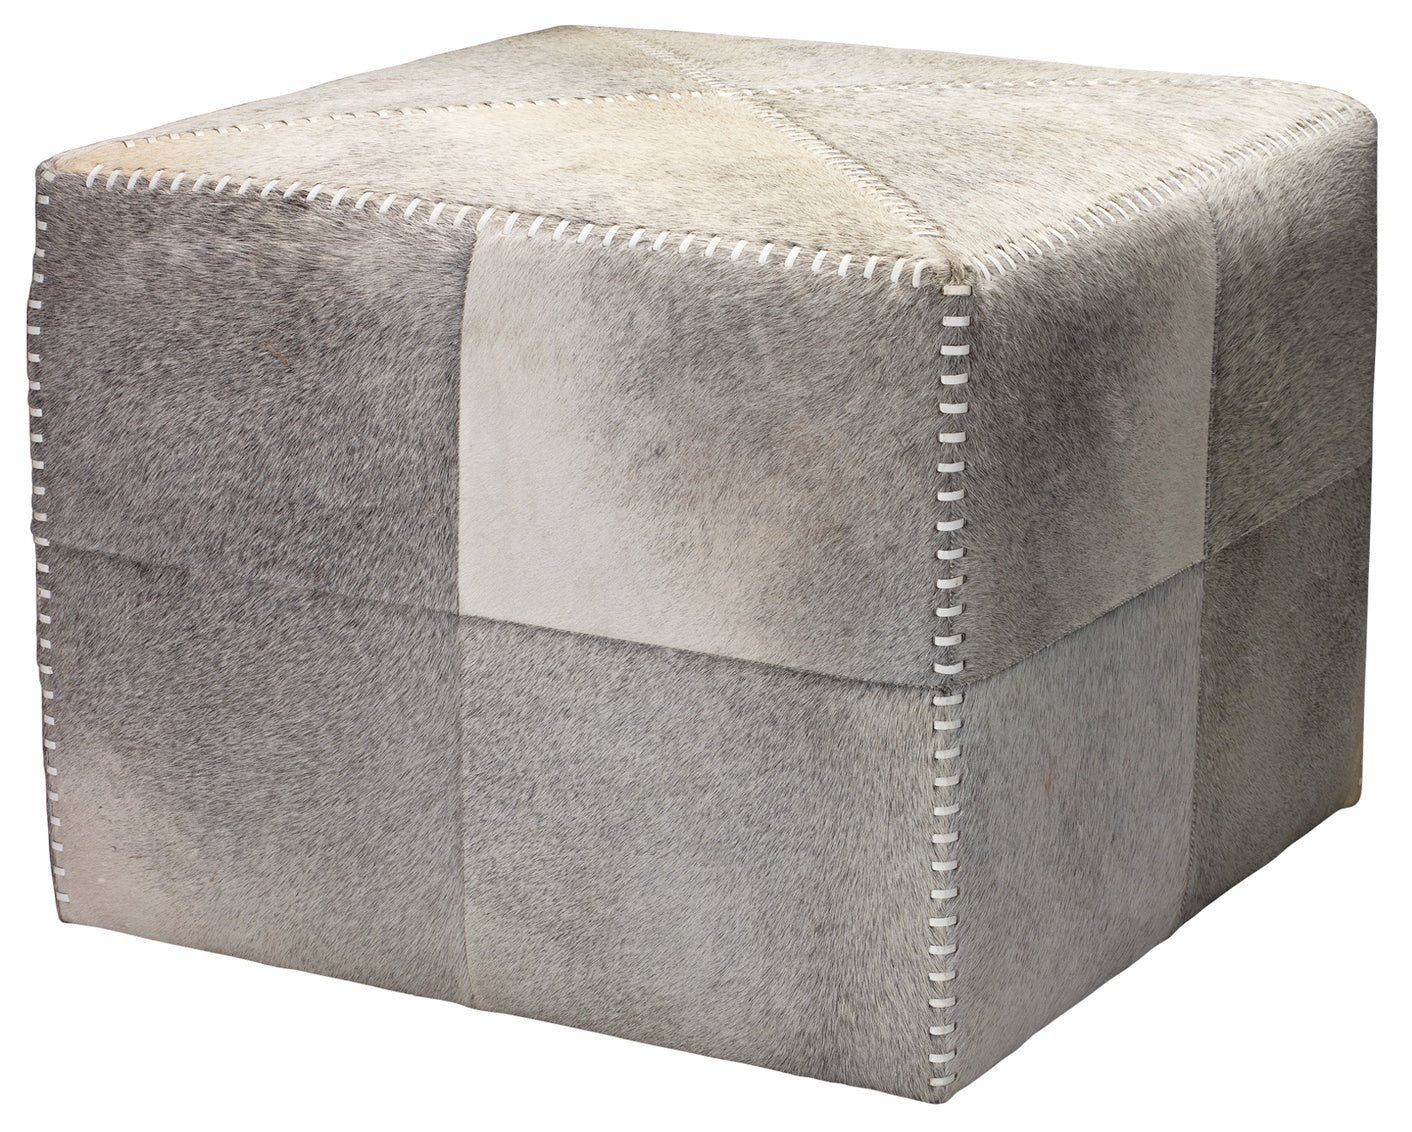 jamie young large ottoman grey hide